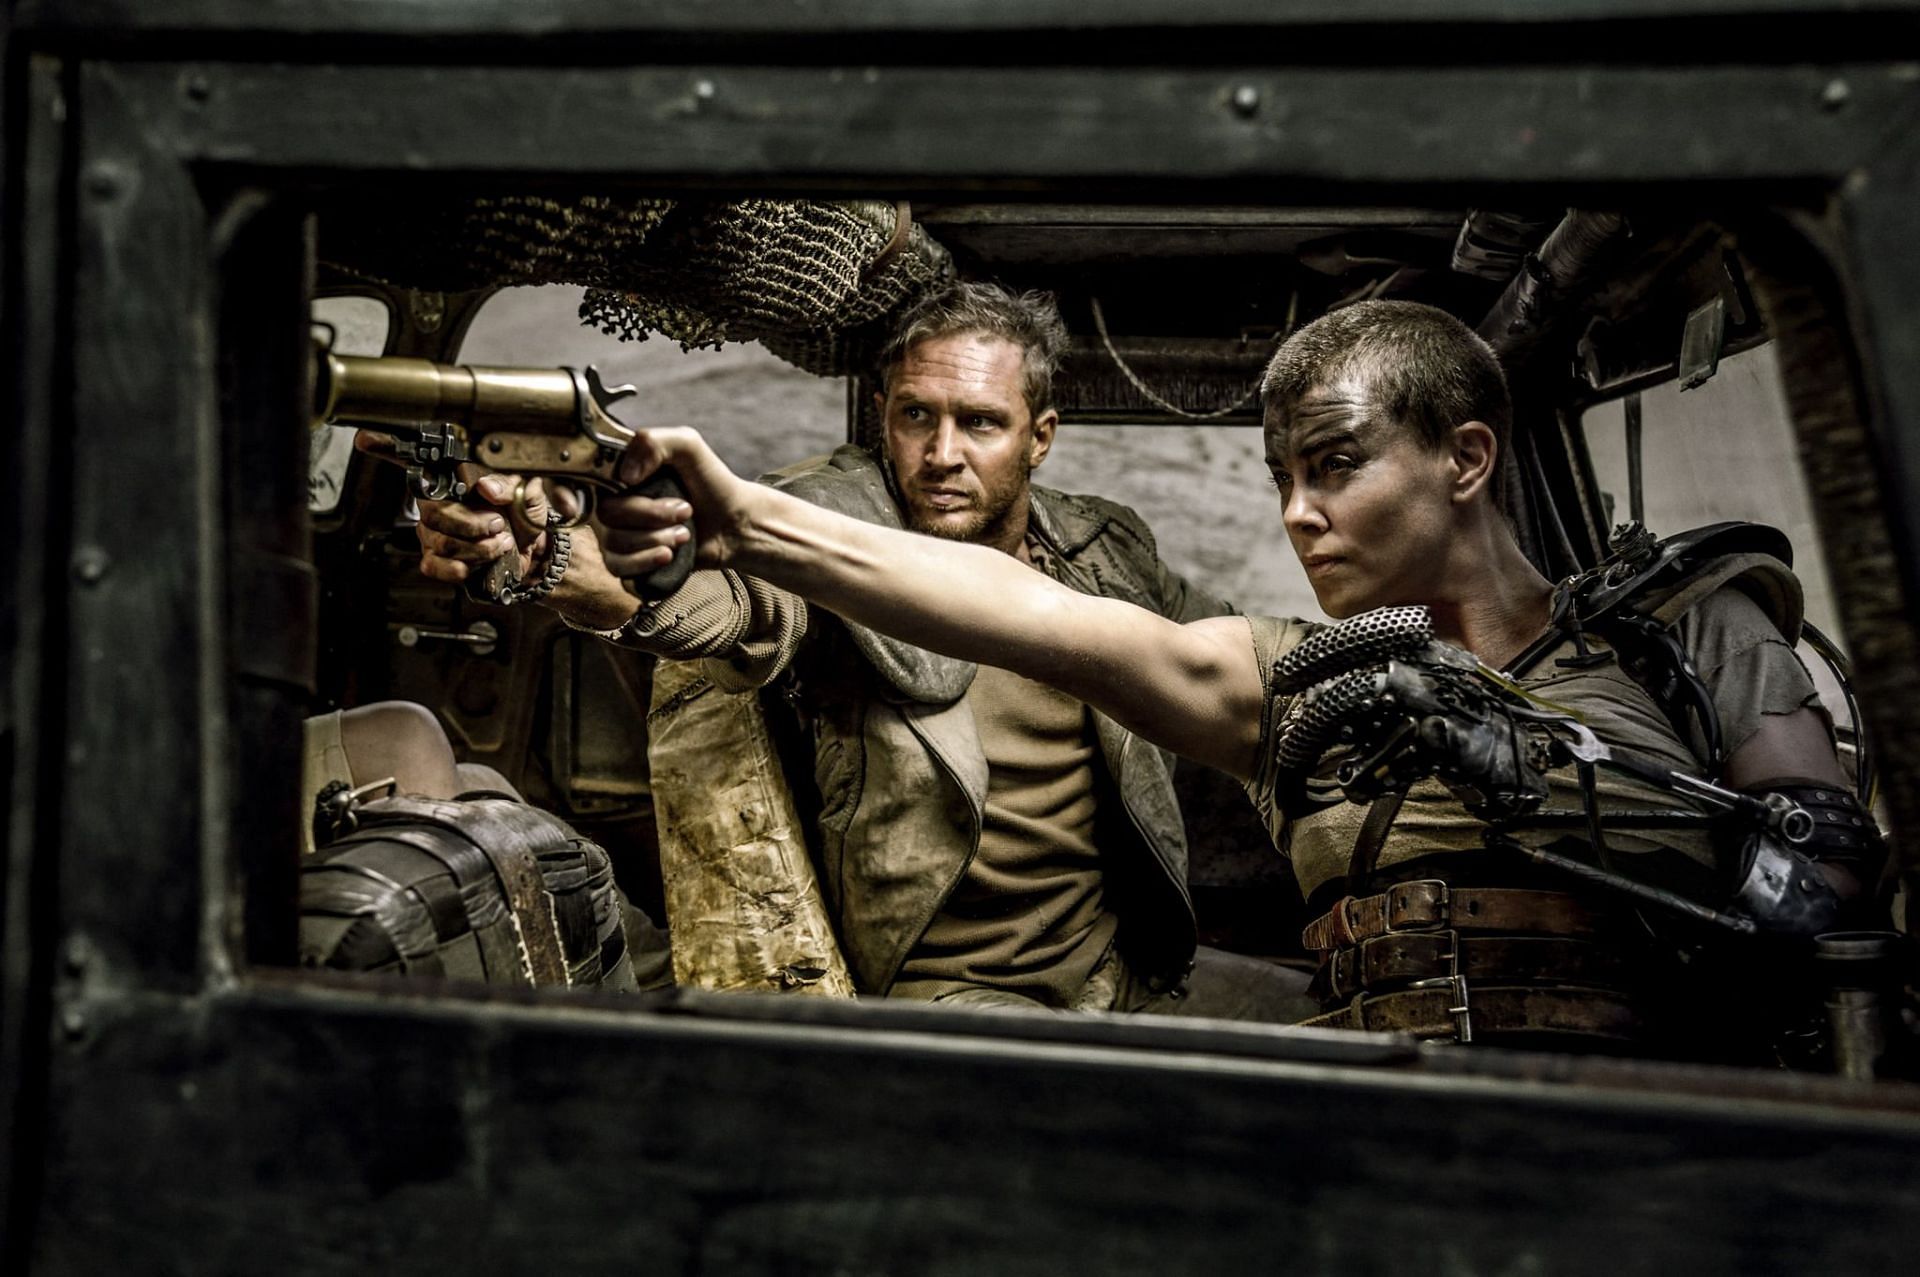 A high-octane, post-apocalyptic road trip through a world gone mad with Charlize Theron and Tom Hardy leading the way (Image via Warner Bros)